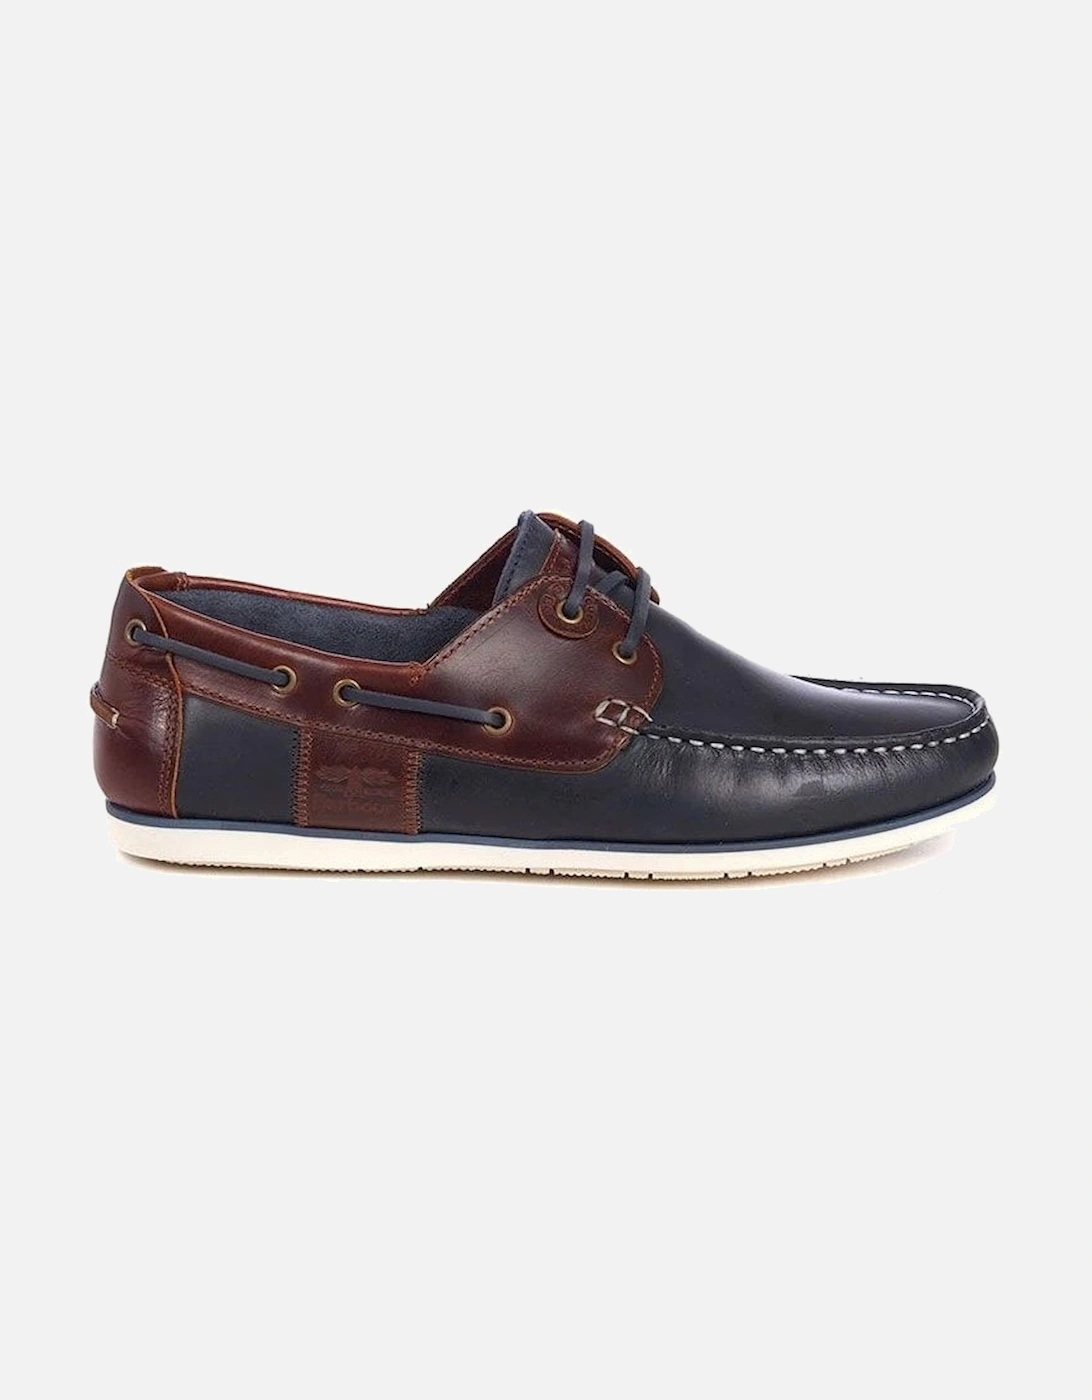 Barbour Men's Navy/ Brown Wake Boat Shoes, 7 of 6